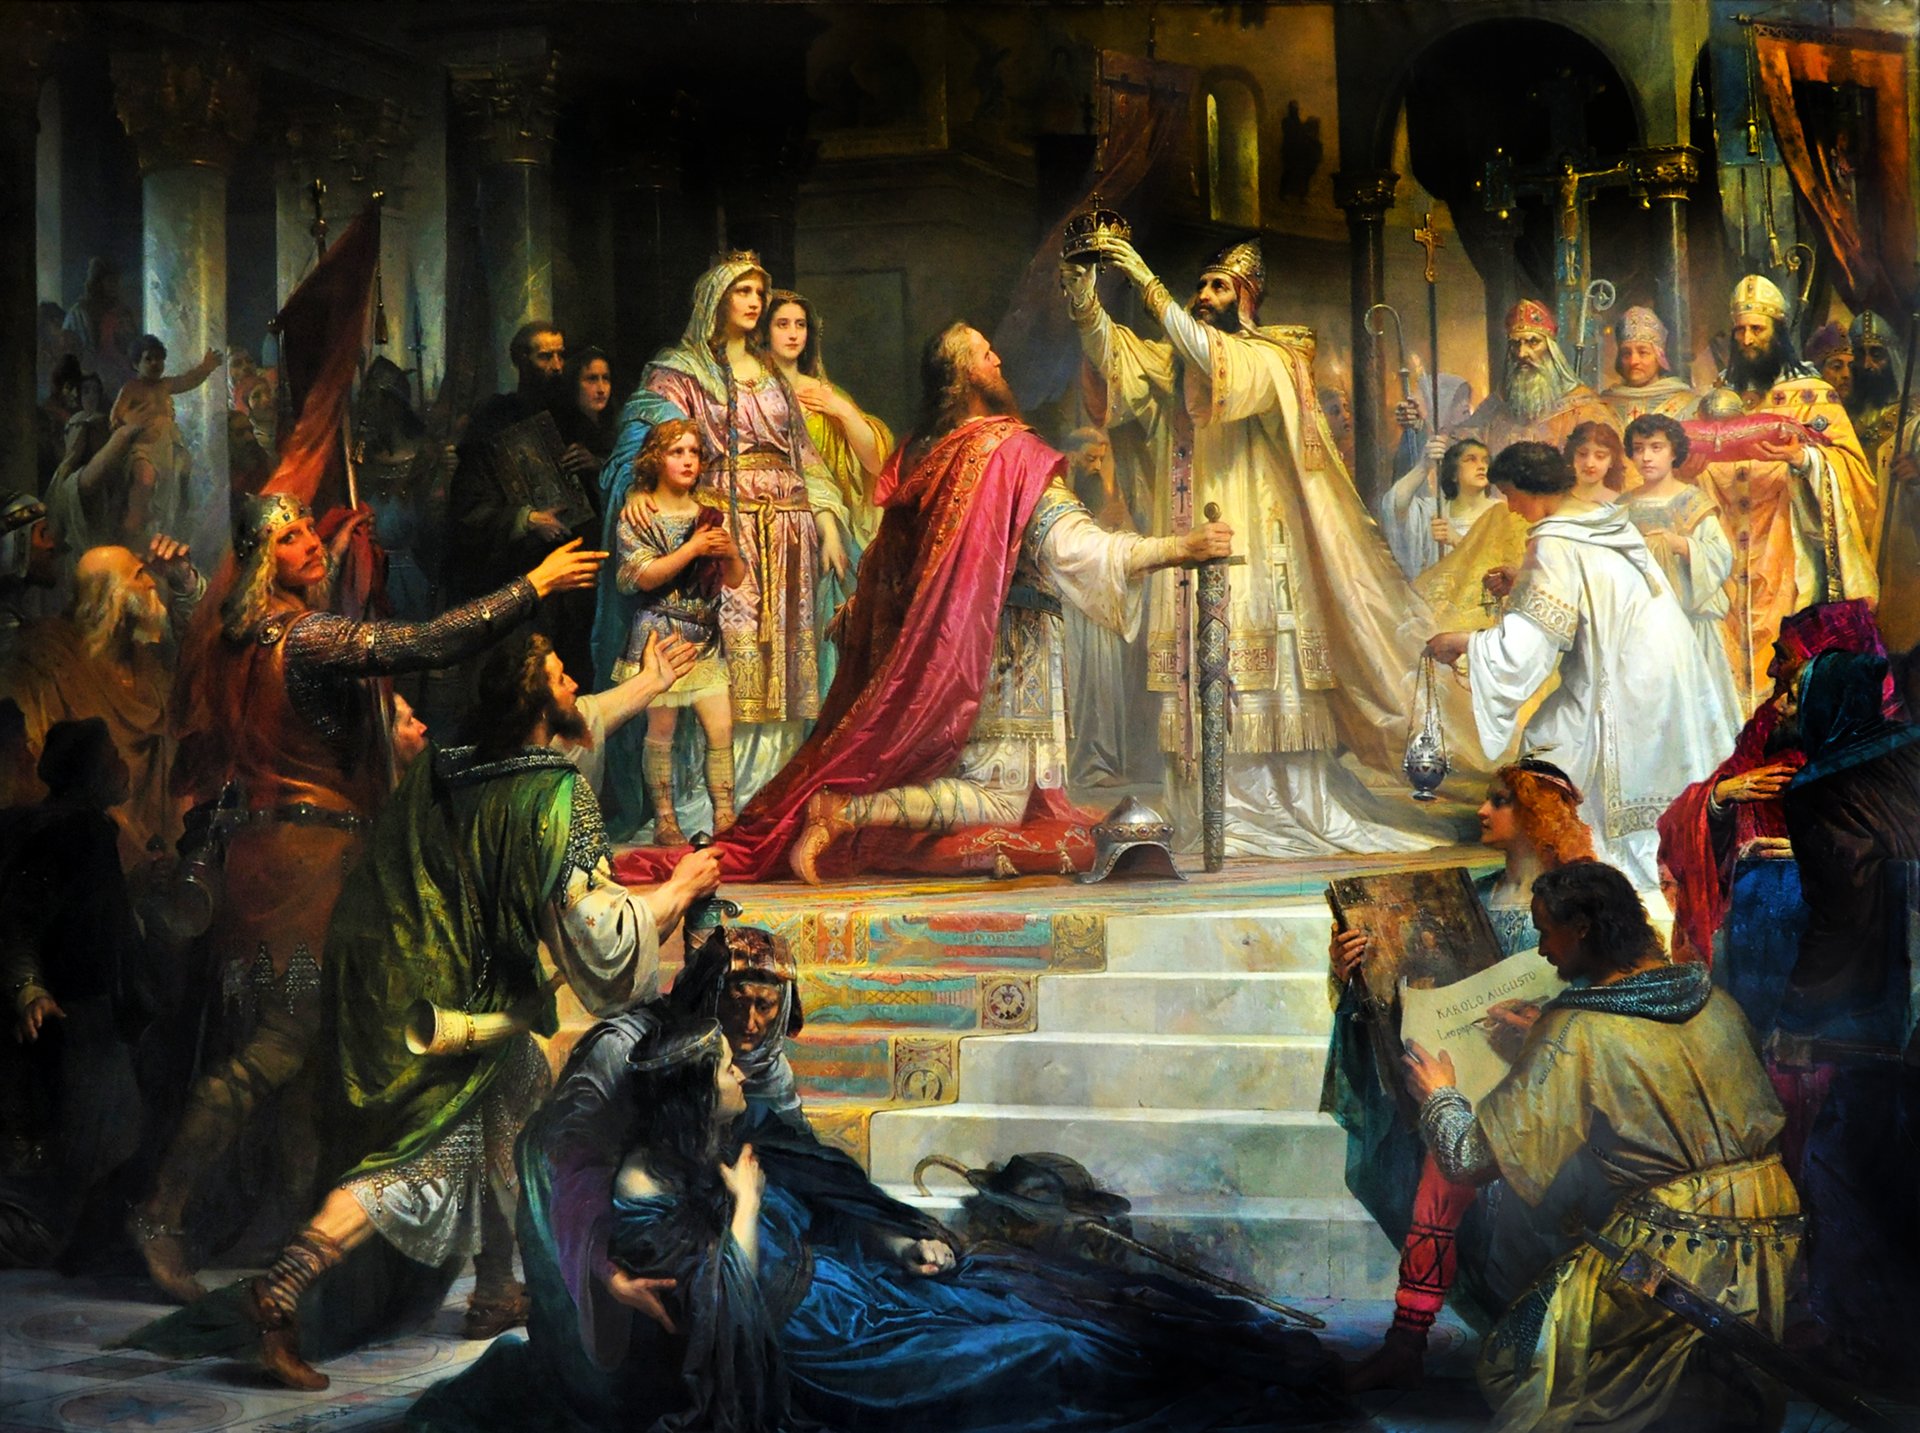 Historic painting depicting the coronation of Charlemagne as Emperor. In a grand cathedral setting, Charlemagne, dressed in regal red robes, kneels reverently. A Pope Leo III, adorned in ornate golden vestments, raises a crown above Charlemagne's head. Surrounding them, various onlookers, including knights, clergy, and nobles, witness the momentous occasion.